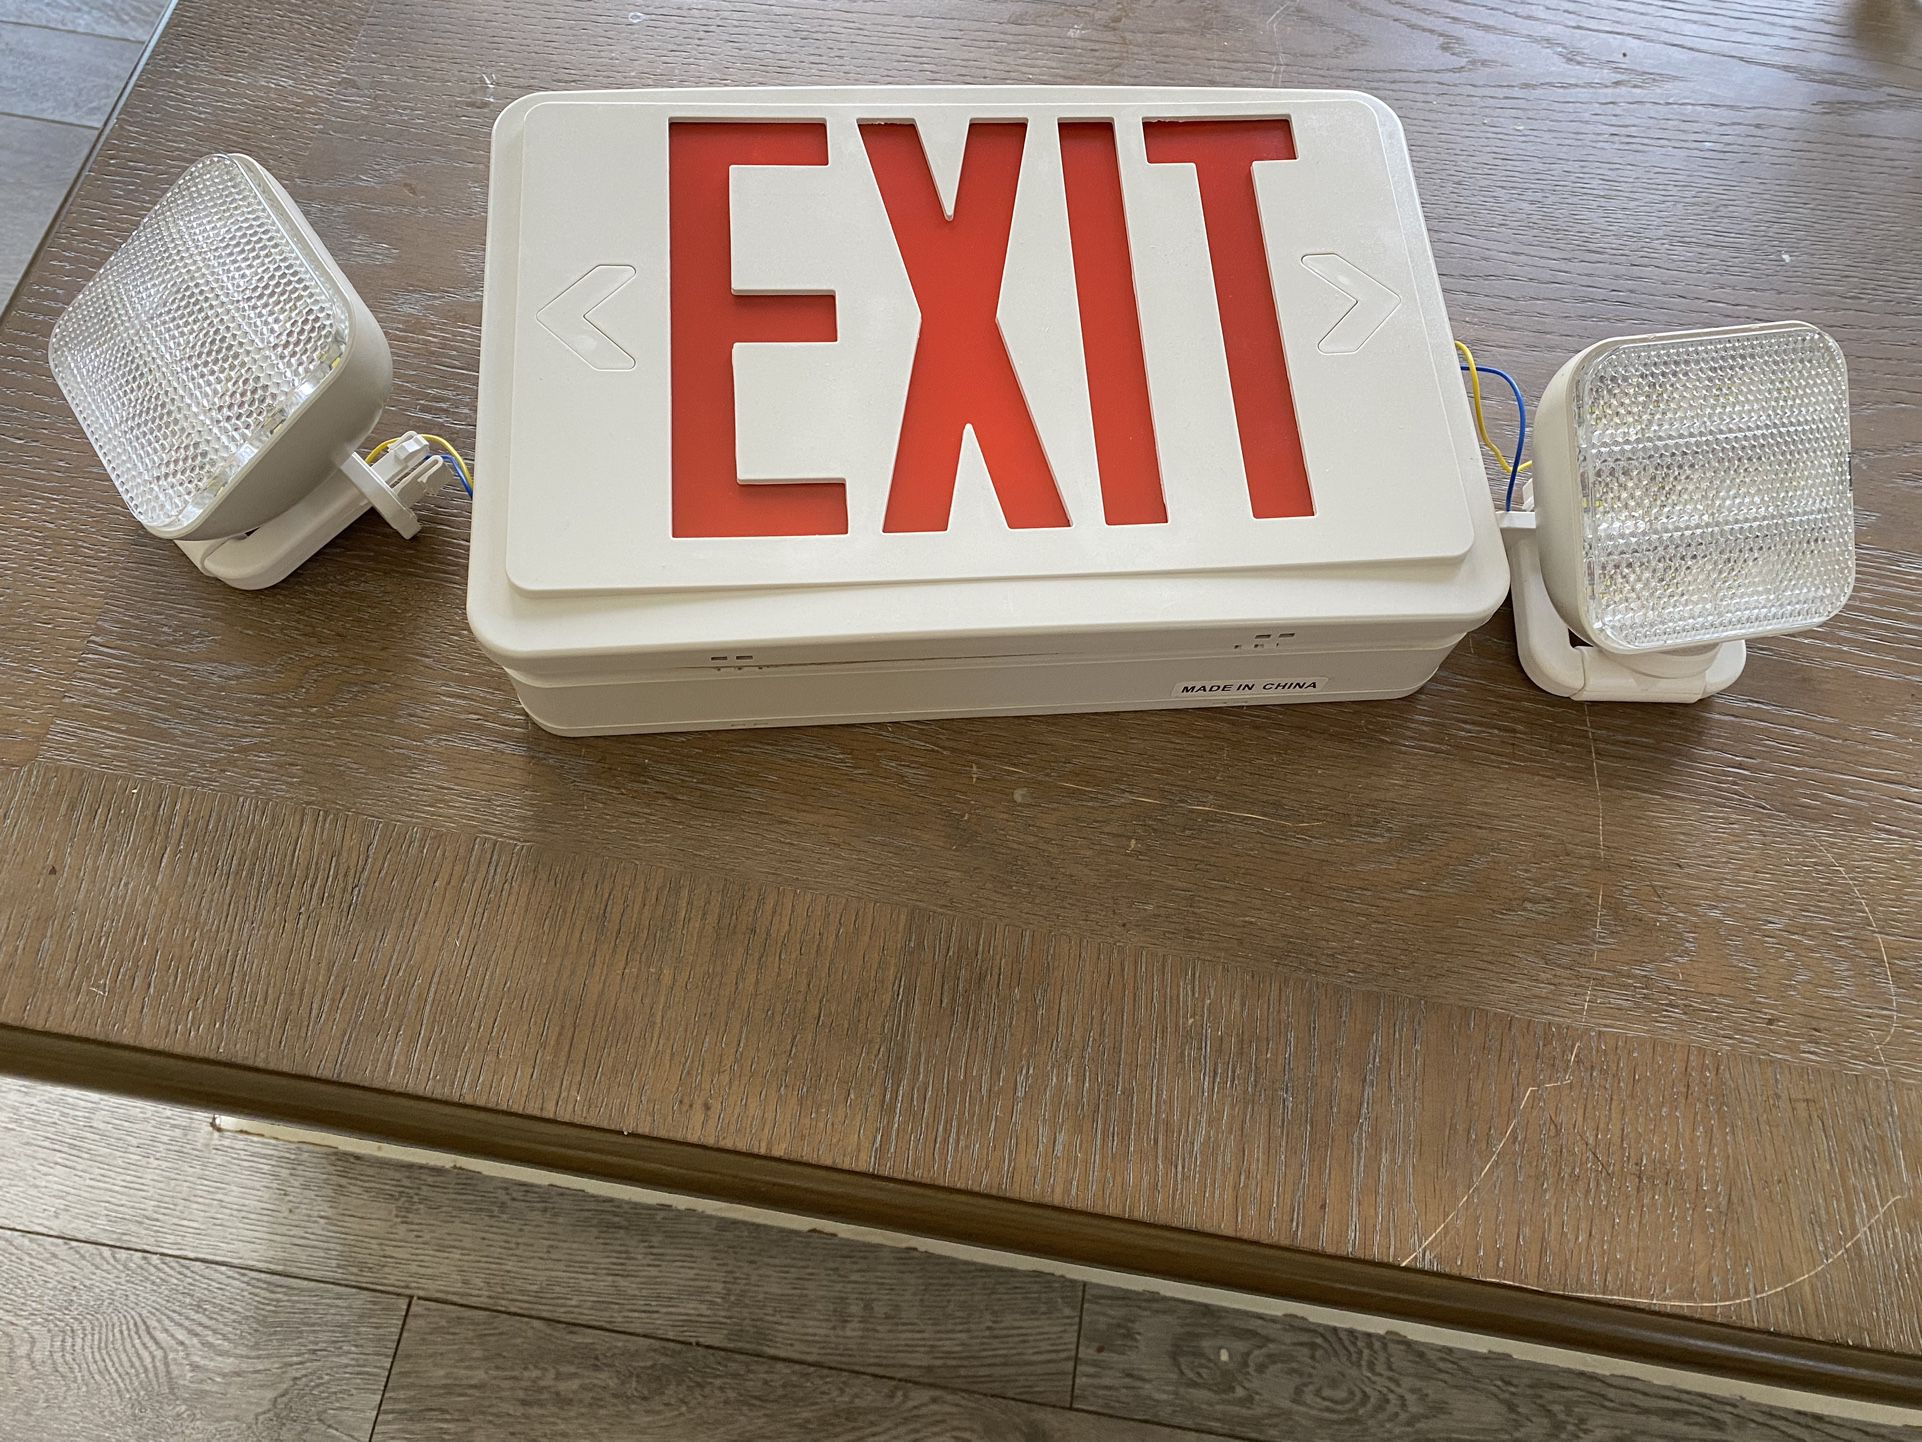 6 Total Double Sided LED Emergency EXIT Sign Two LED Flood Lights Emergency Exit Sign, Red Letters,